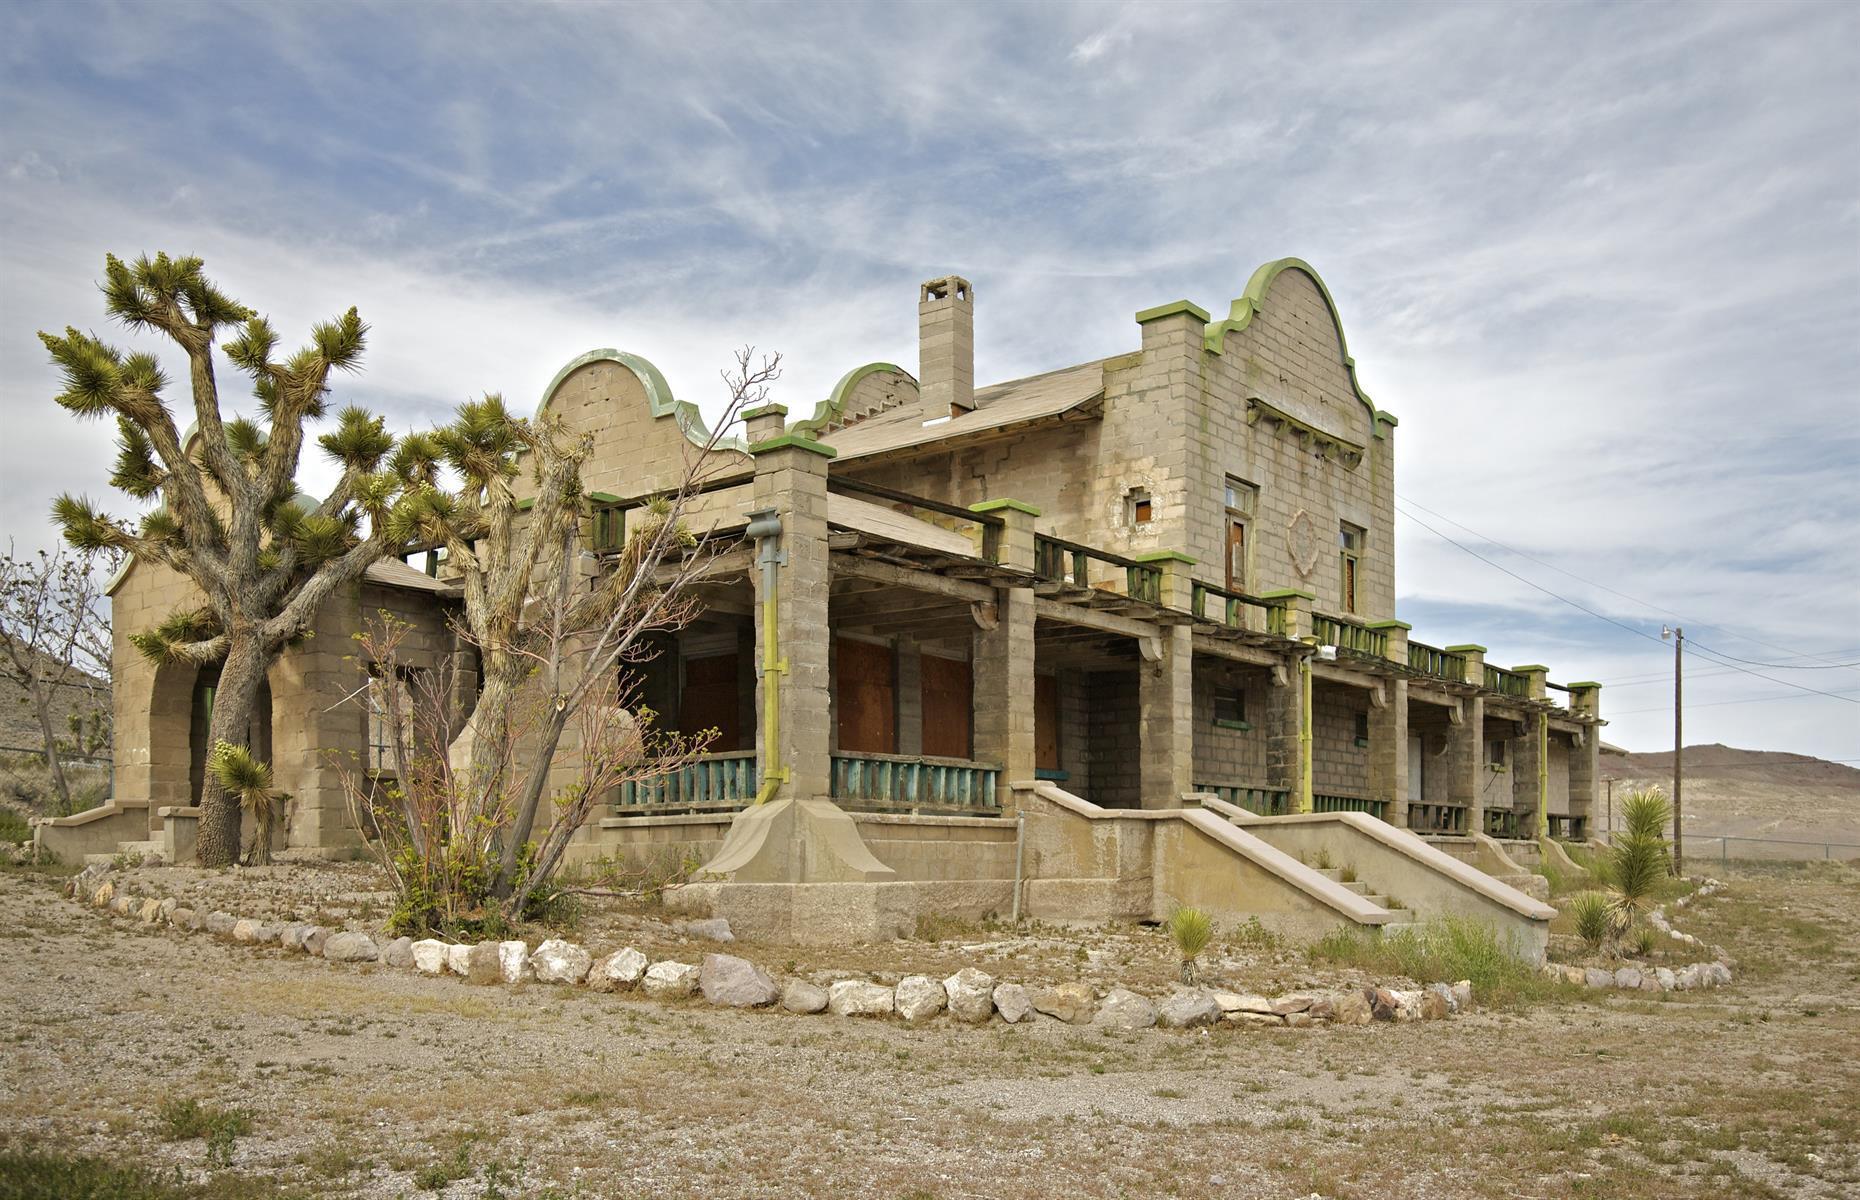 America's Most Fascinating Ghost Towns